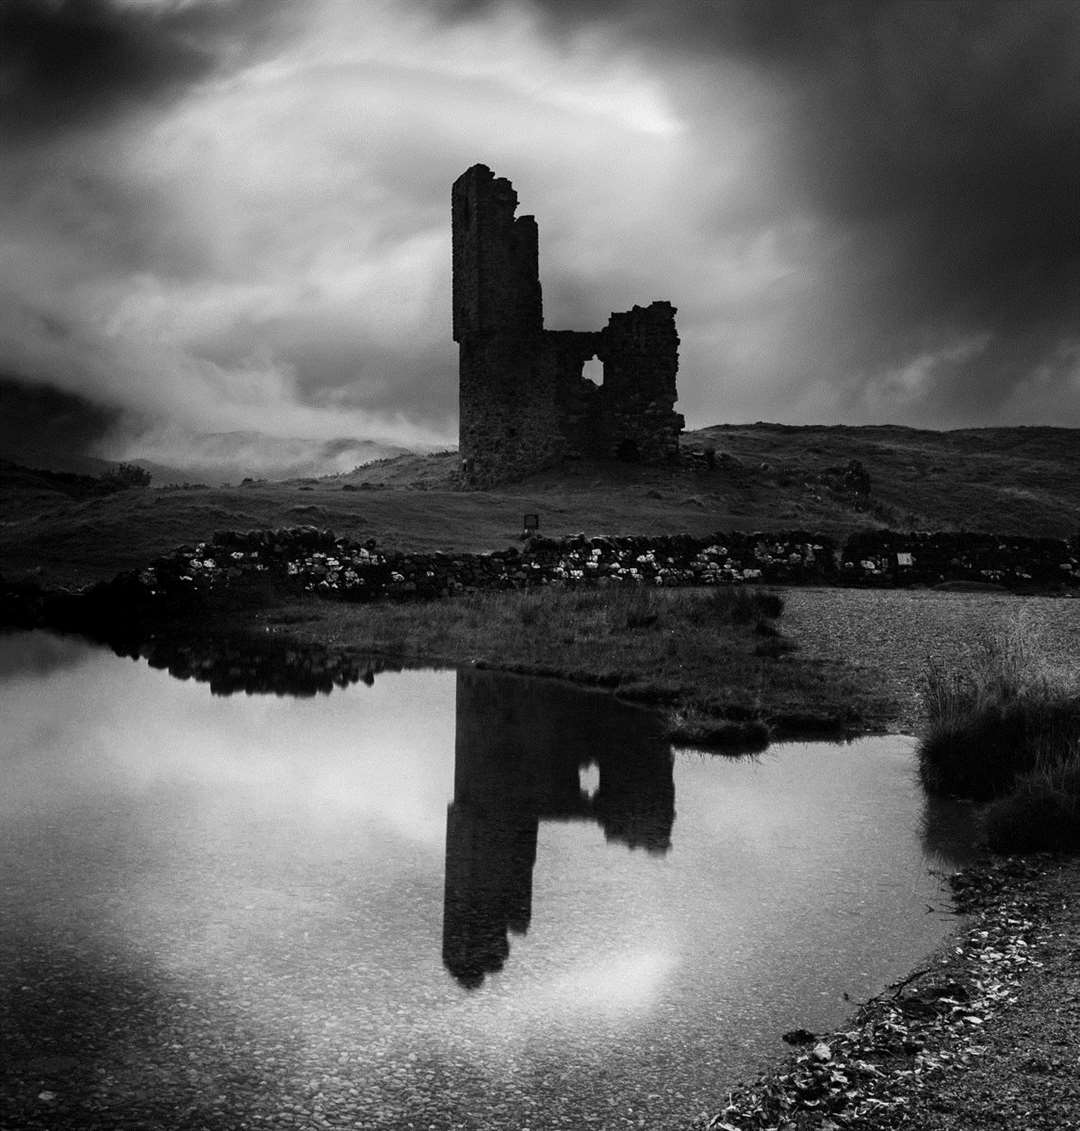 Andy Kirby, Dornoch came third in the monochrome category with his image of Highland landmark, Ardvreck Castle.